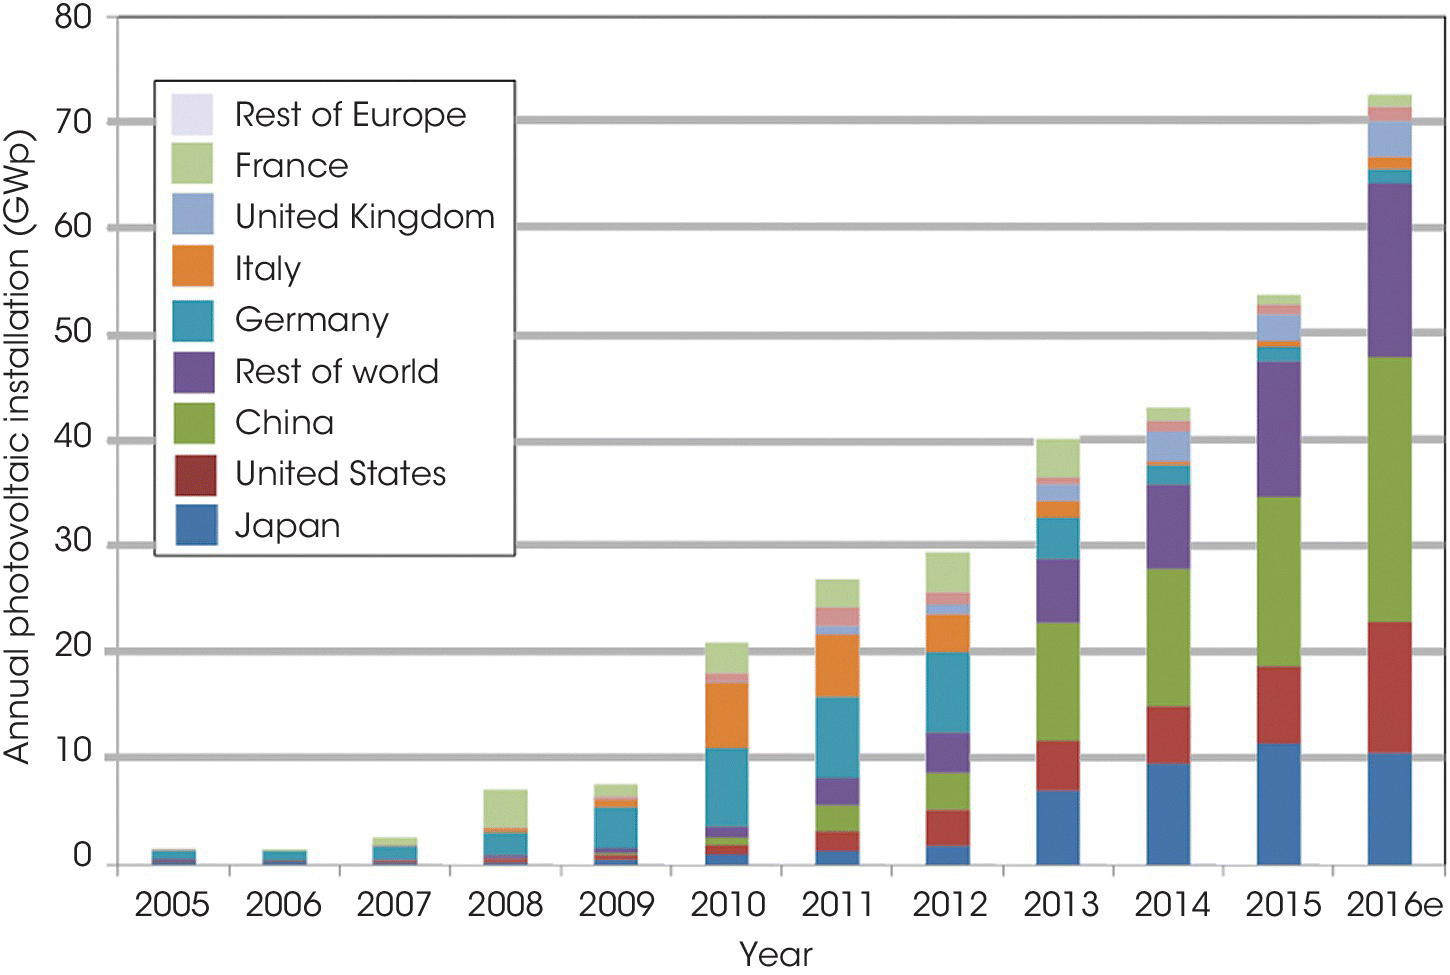 Stacked bar graph of annual photovoltaic installation of Japan, United States, China, Rest of world, Germany, Italy, United Kingdom, France, and Rest of Europe from 2005 to 2016.